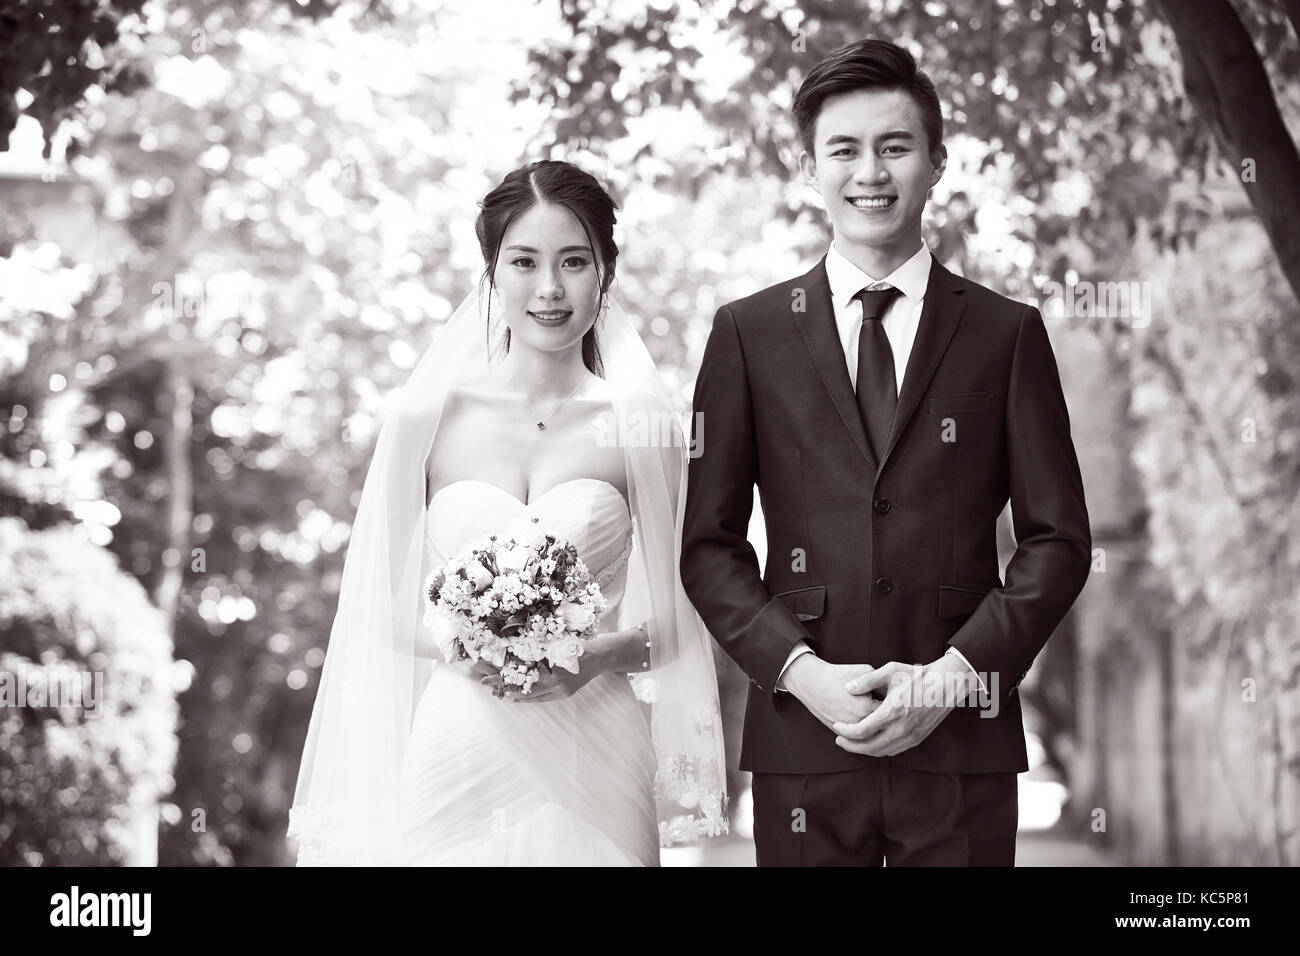 outdoor portrait of asian bride and groom looking at camera smiling, black and white. Stock Photo